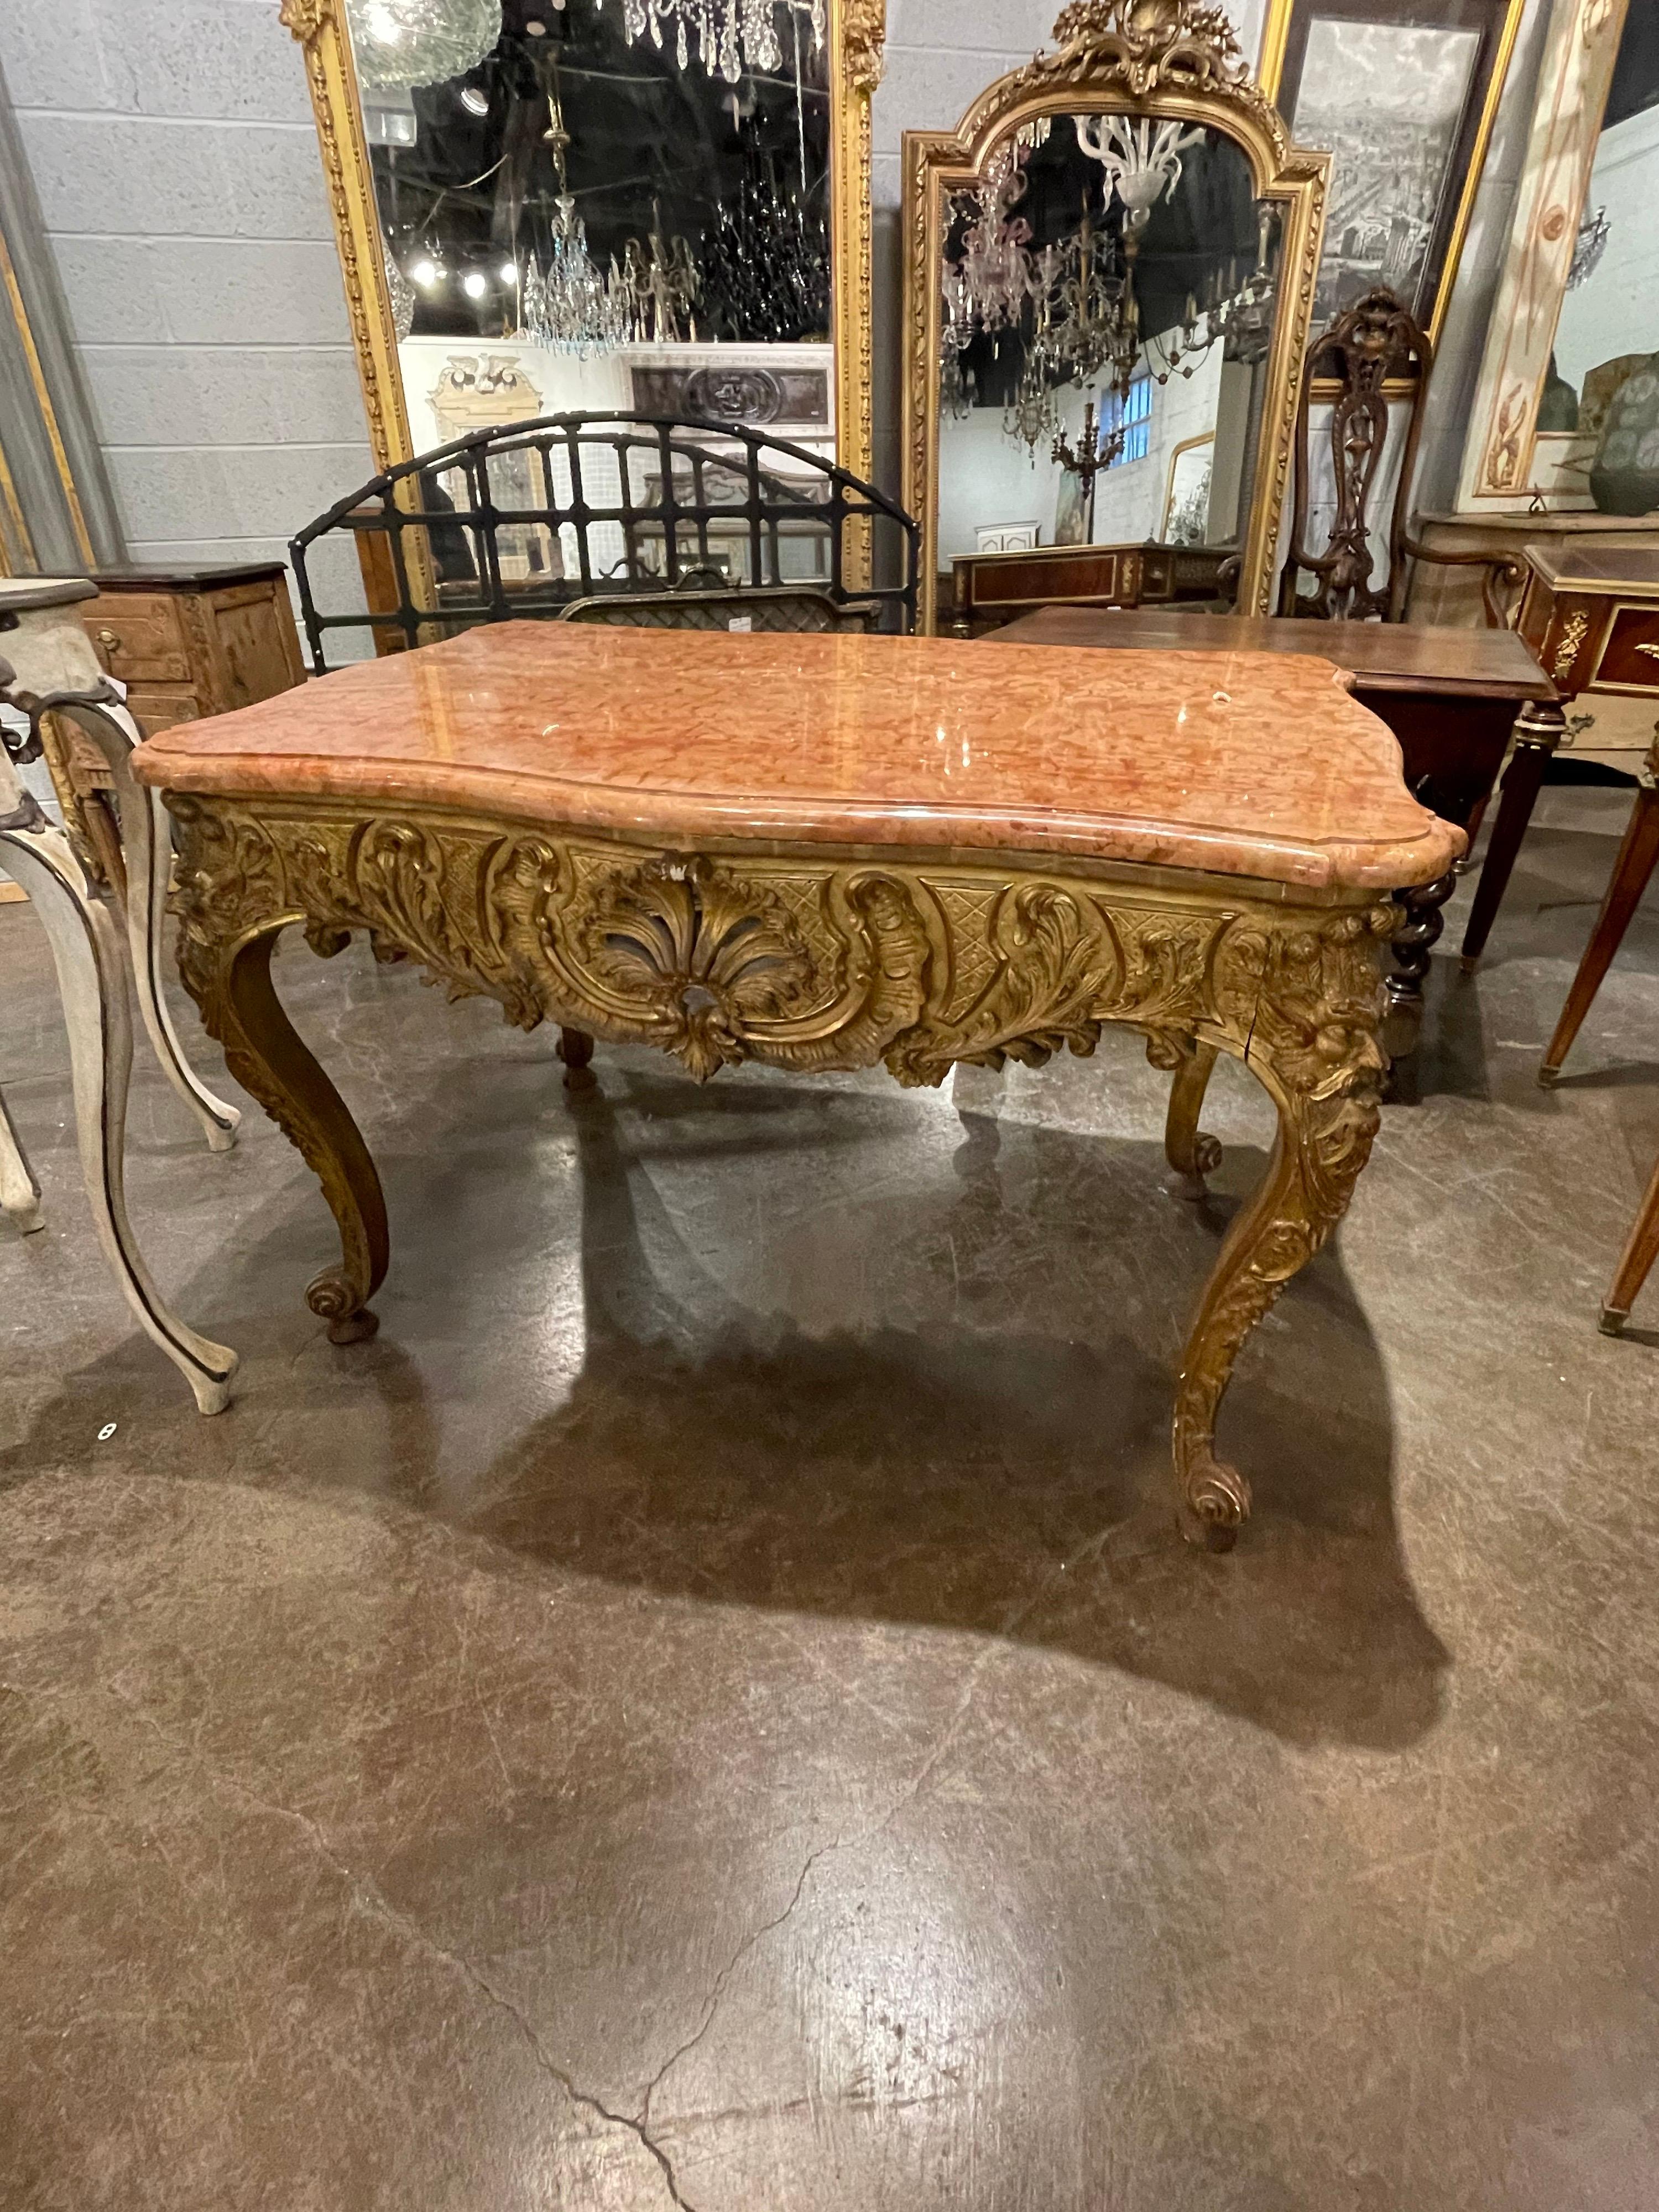 Superior quality 19th century Italian giltwood and marble top centre table. The apron ornately carved with scrolling leaves and shells. The corners with superbly detailed carvings of mythological masks.

The entire on elaborately carved cabriole